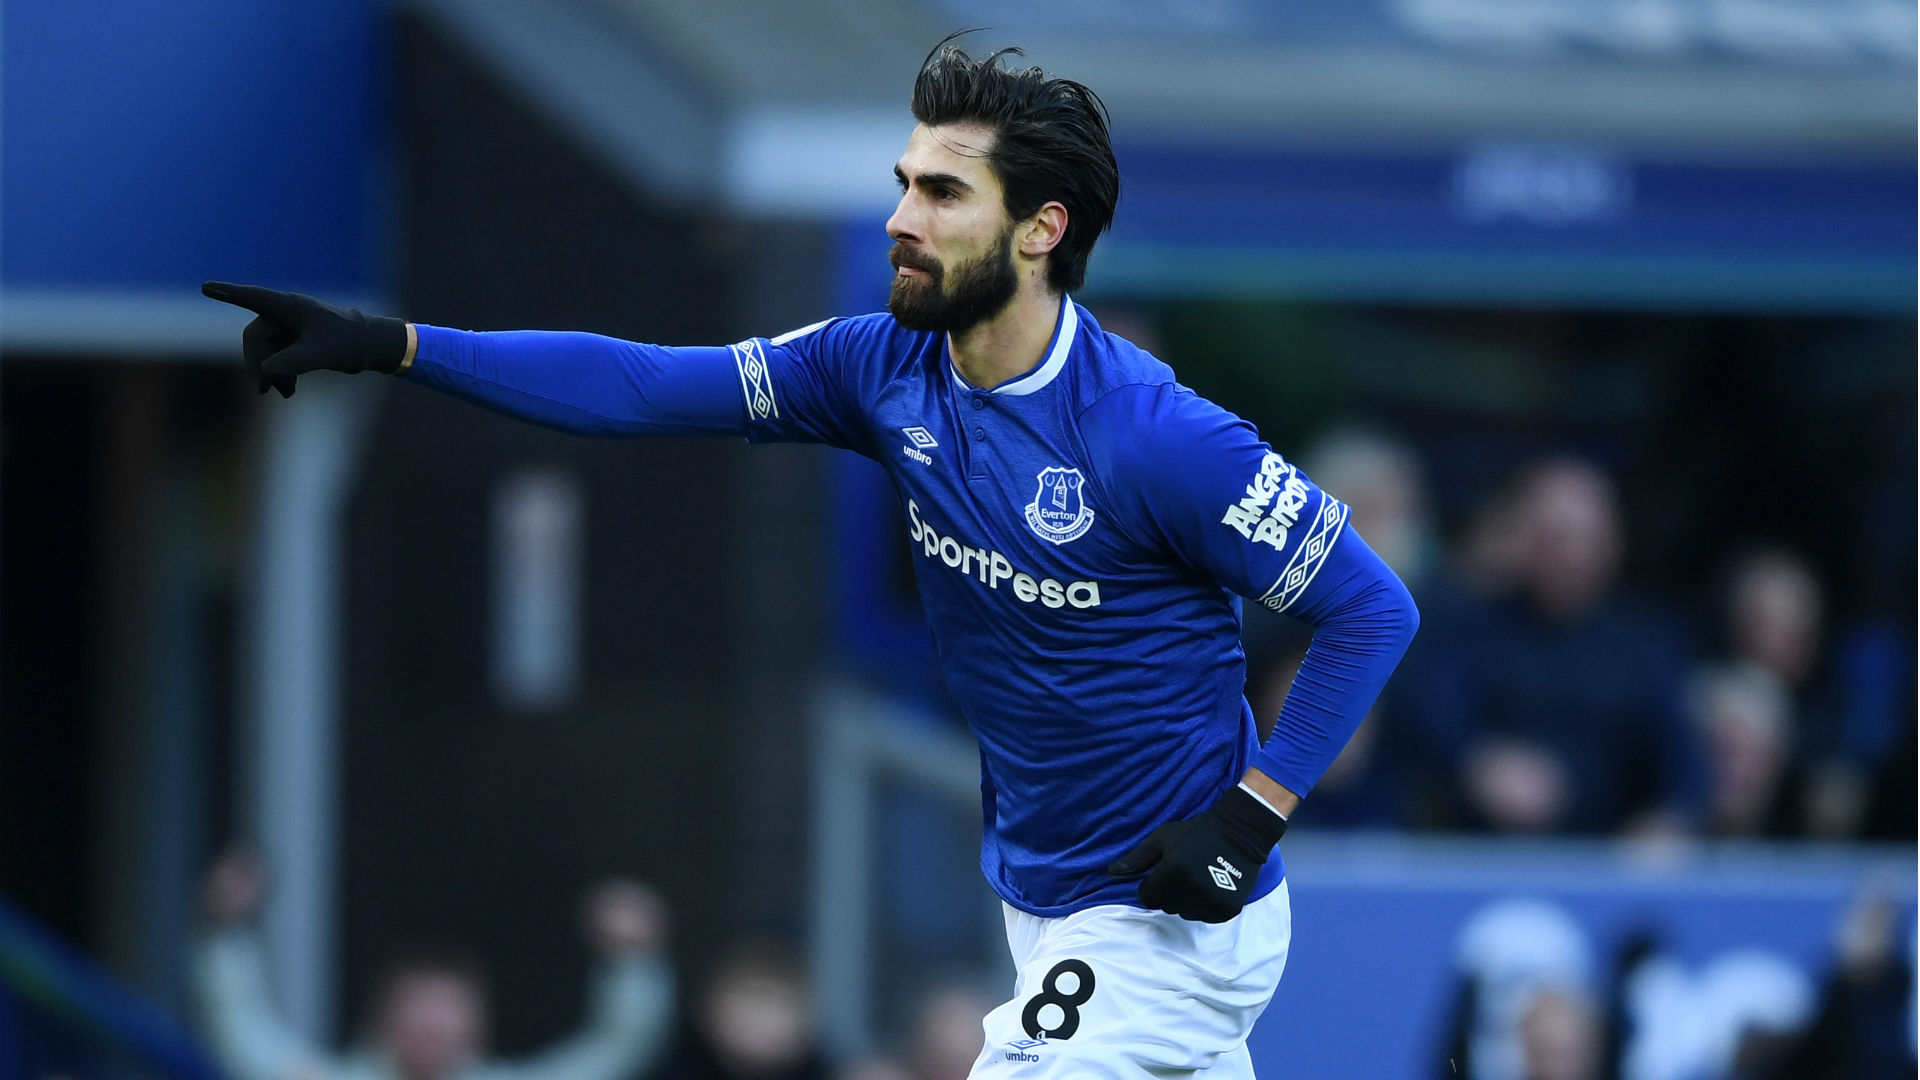 After impressing during his season on loan at Goodison Park, Everton have reached an agreement to sign Andre Gomes from Barcelona for £22m.